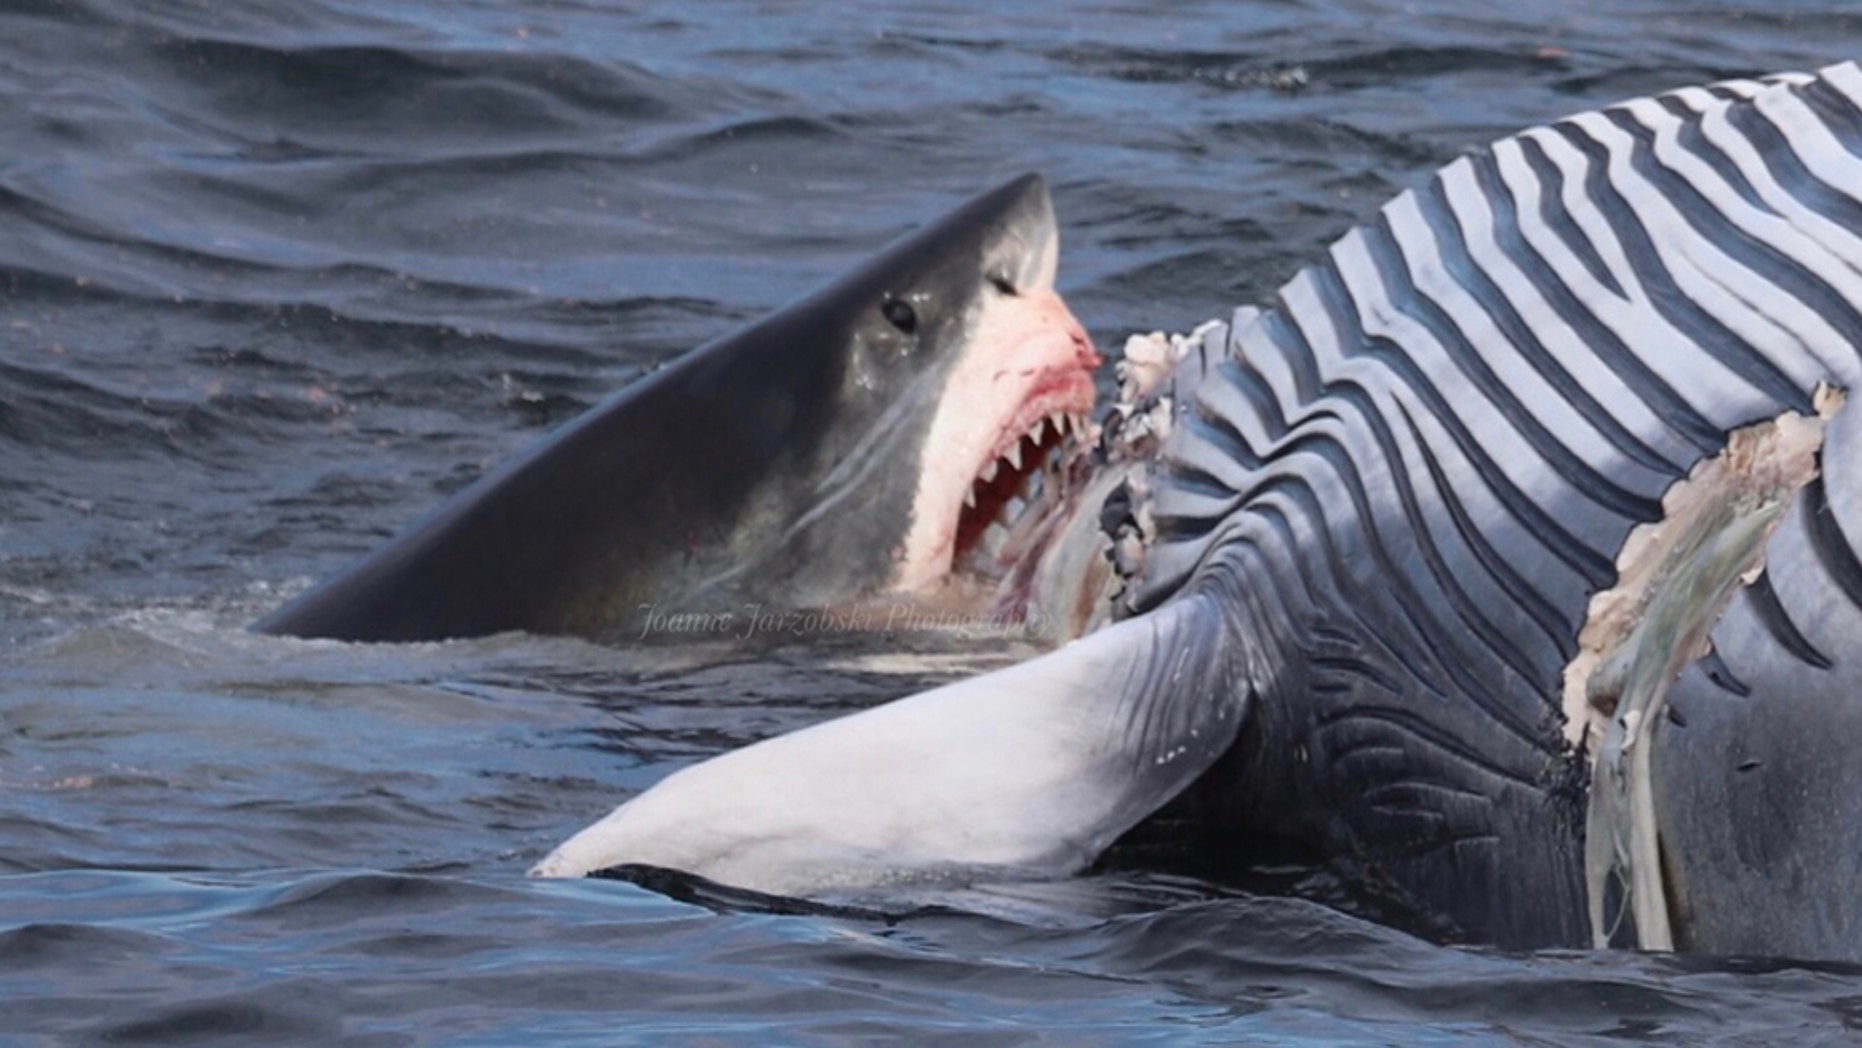 Marcia Keller News: Why Do Sharks Attack Whales